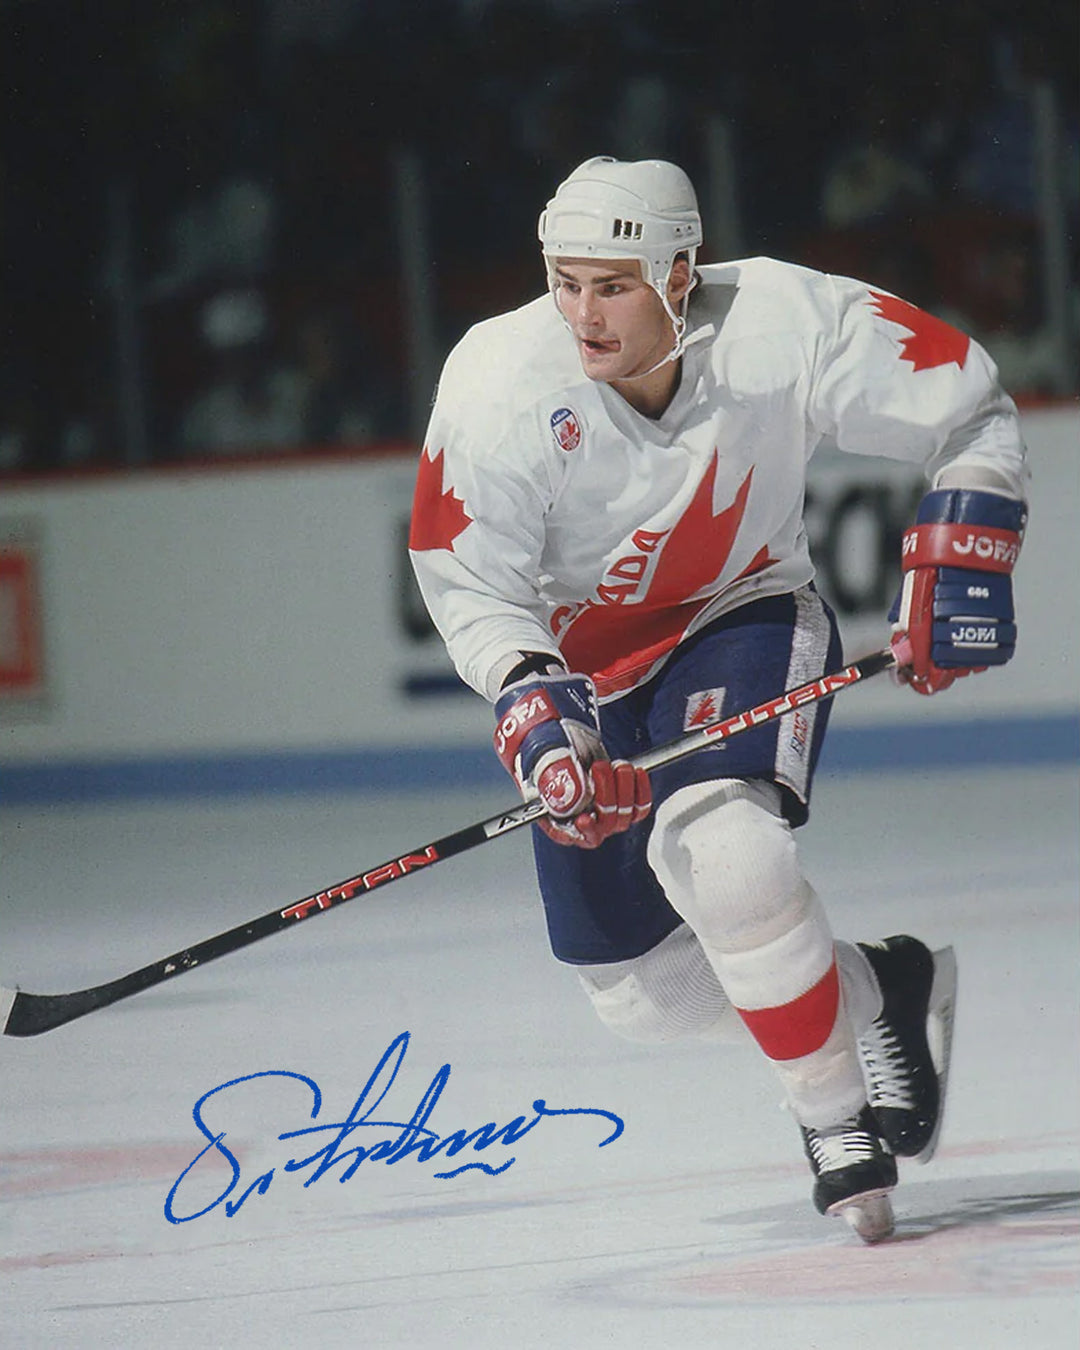 Eric Lindros Signed 8X10 Photo - Team Canada, Team Canada, NHL, Hockey, Autographed, Signed, AAHPH331047